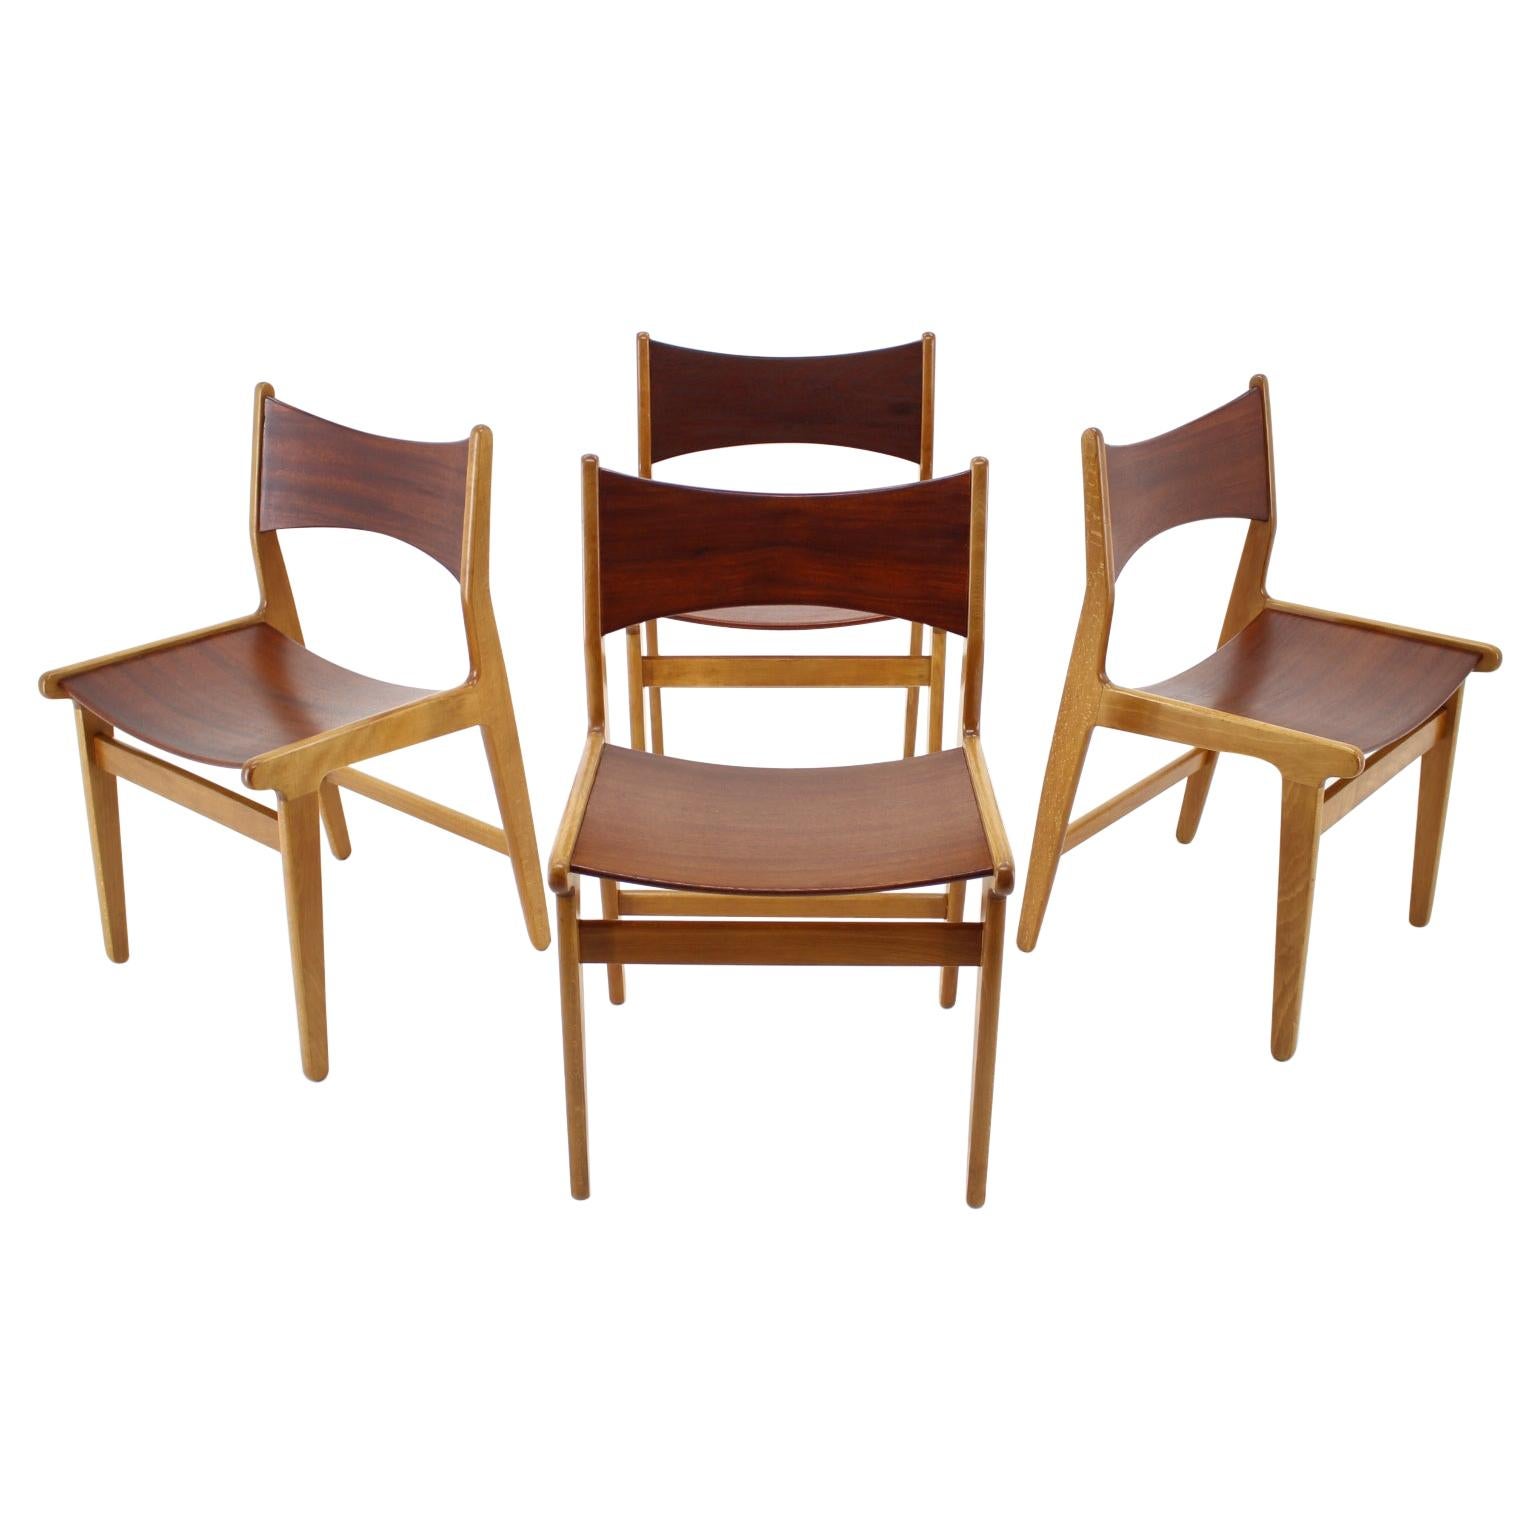 1960s Set of 4 Teak and Beech Dining Chairs, Denmark